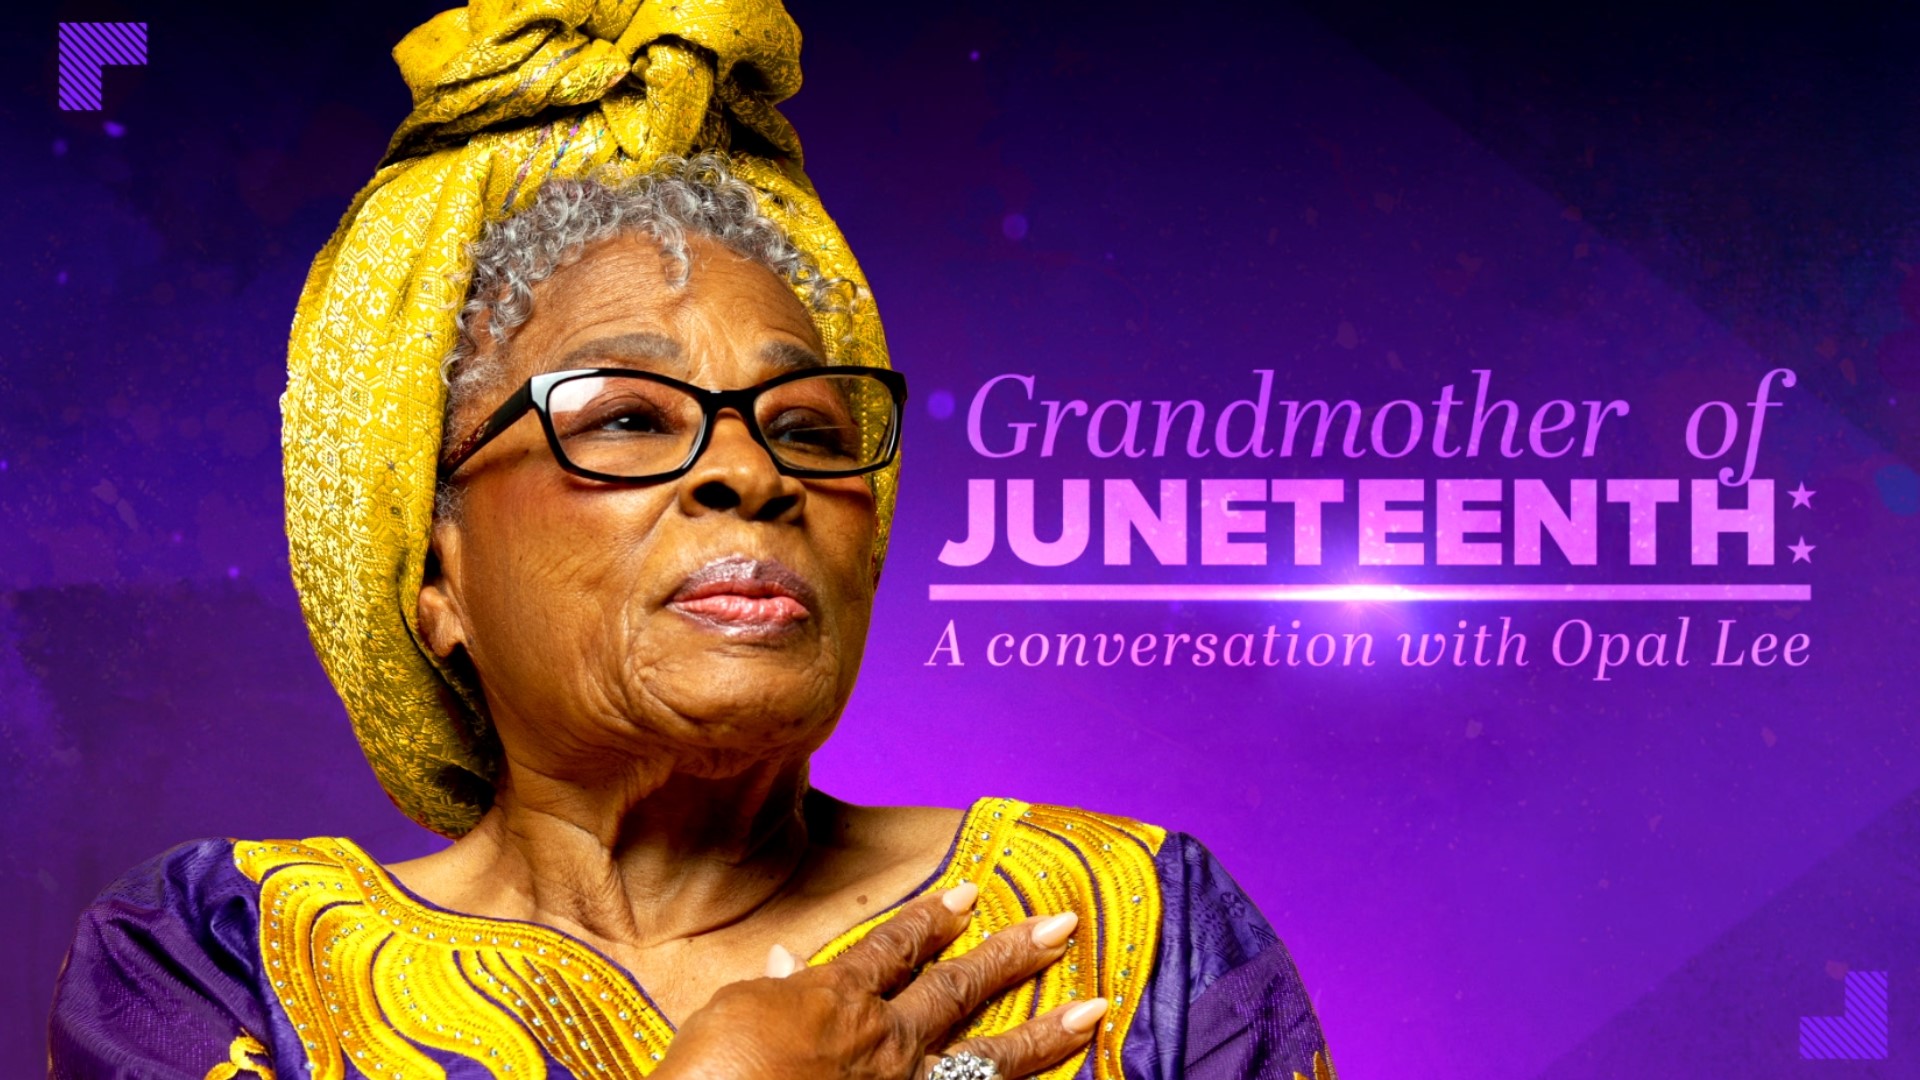 Opal Lee, known as the "Grandmother of Juneteenth," joins WFAA anchor Tashara Parker for a candid conversation about Juneteenth and her life's work.